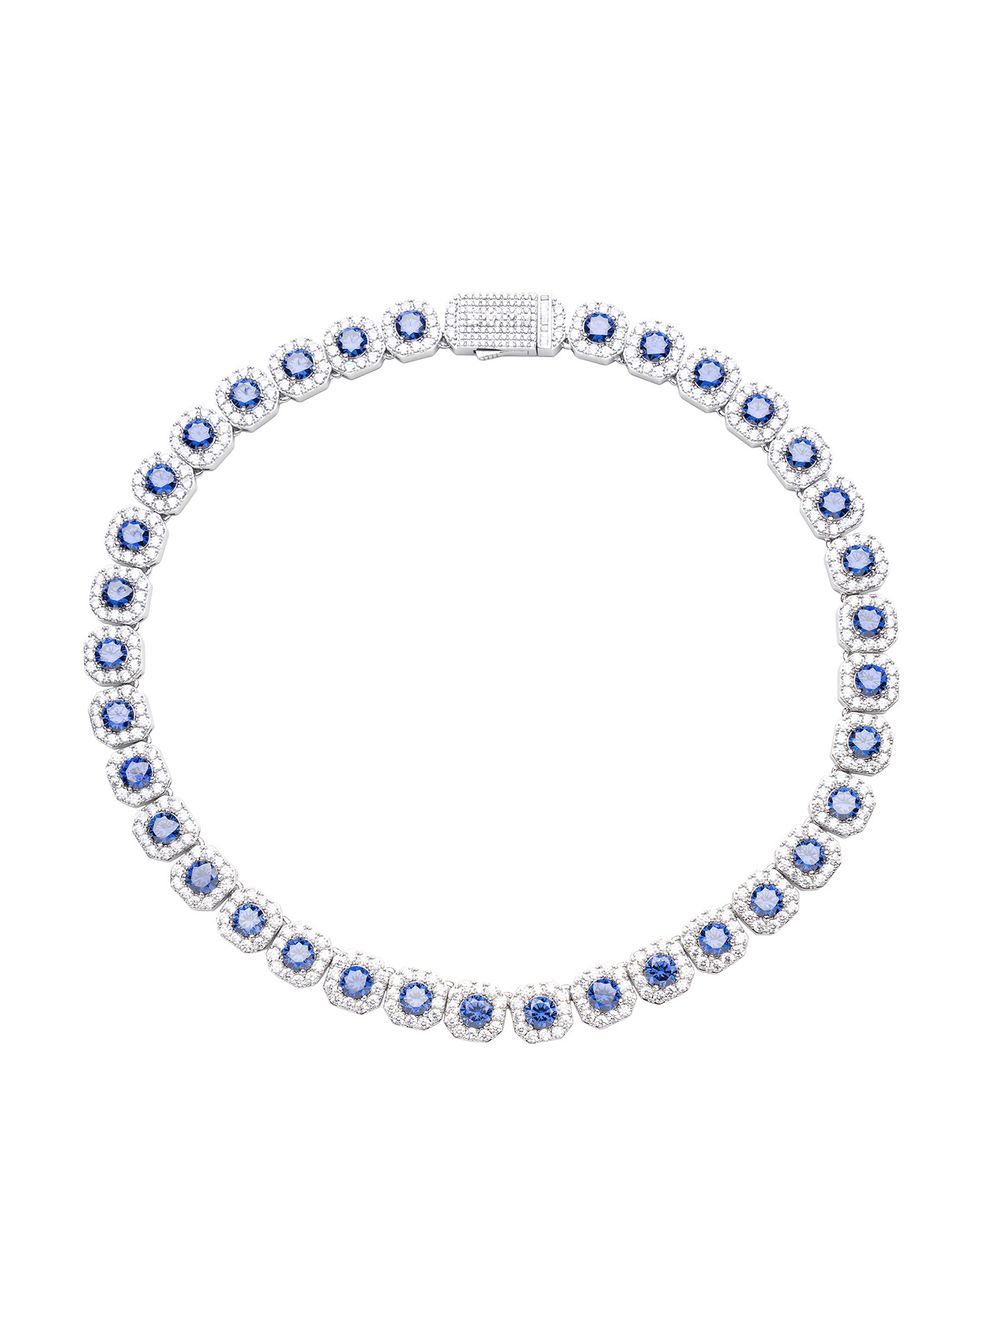 12mm Hip Hop Iced Out Royal Blue Sparkling Cluster Tennis Chain Necklace for Men Women